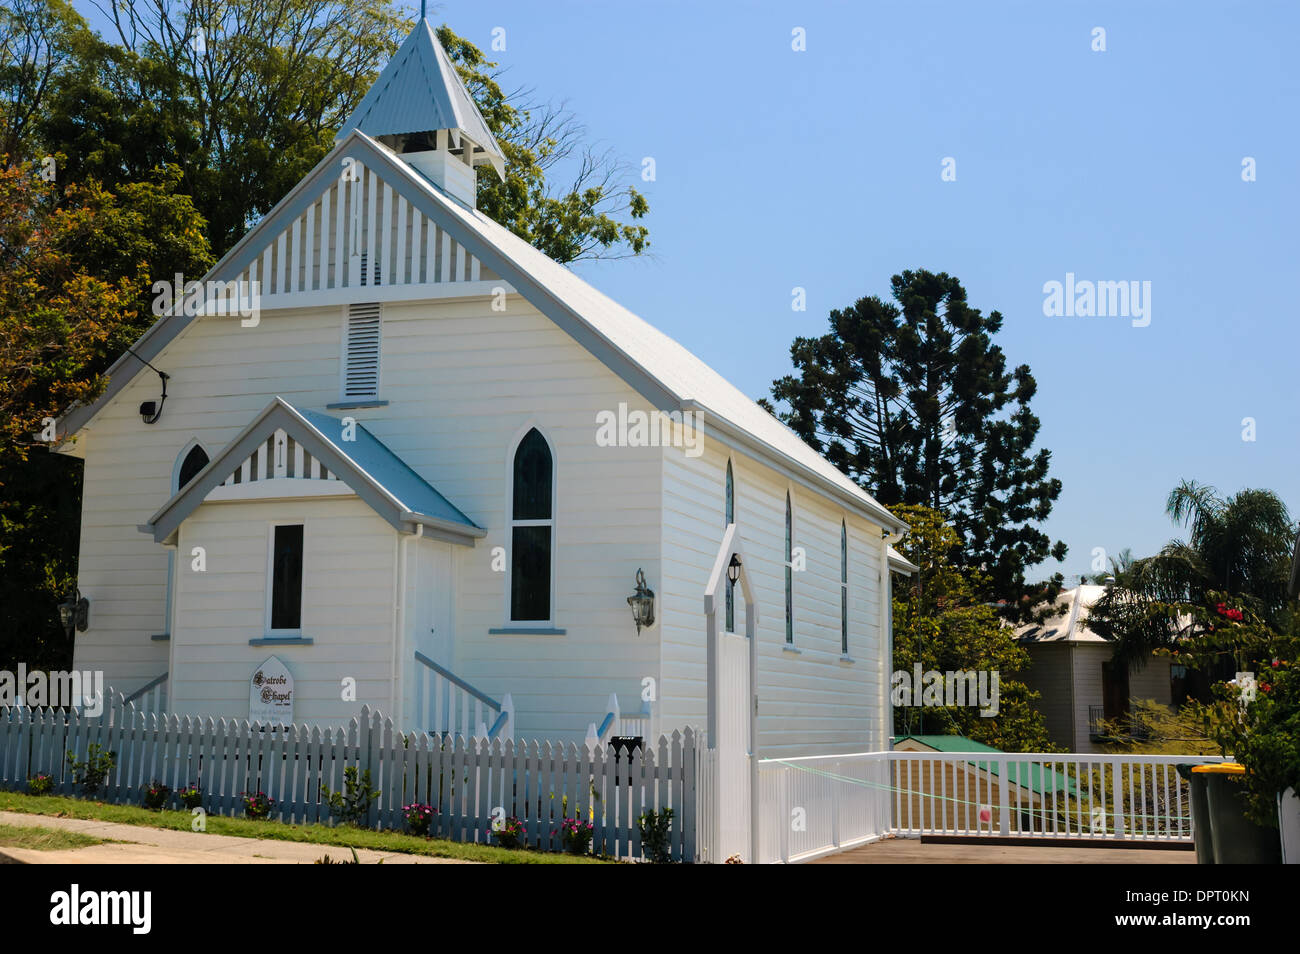 Old small white wooden weatherboard church in Paddington, a suburb of Brisbane, Queensland, Australia Stock Photo